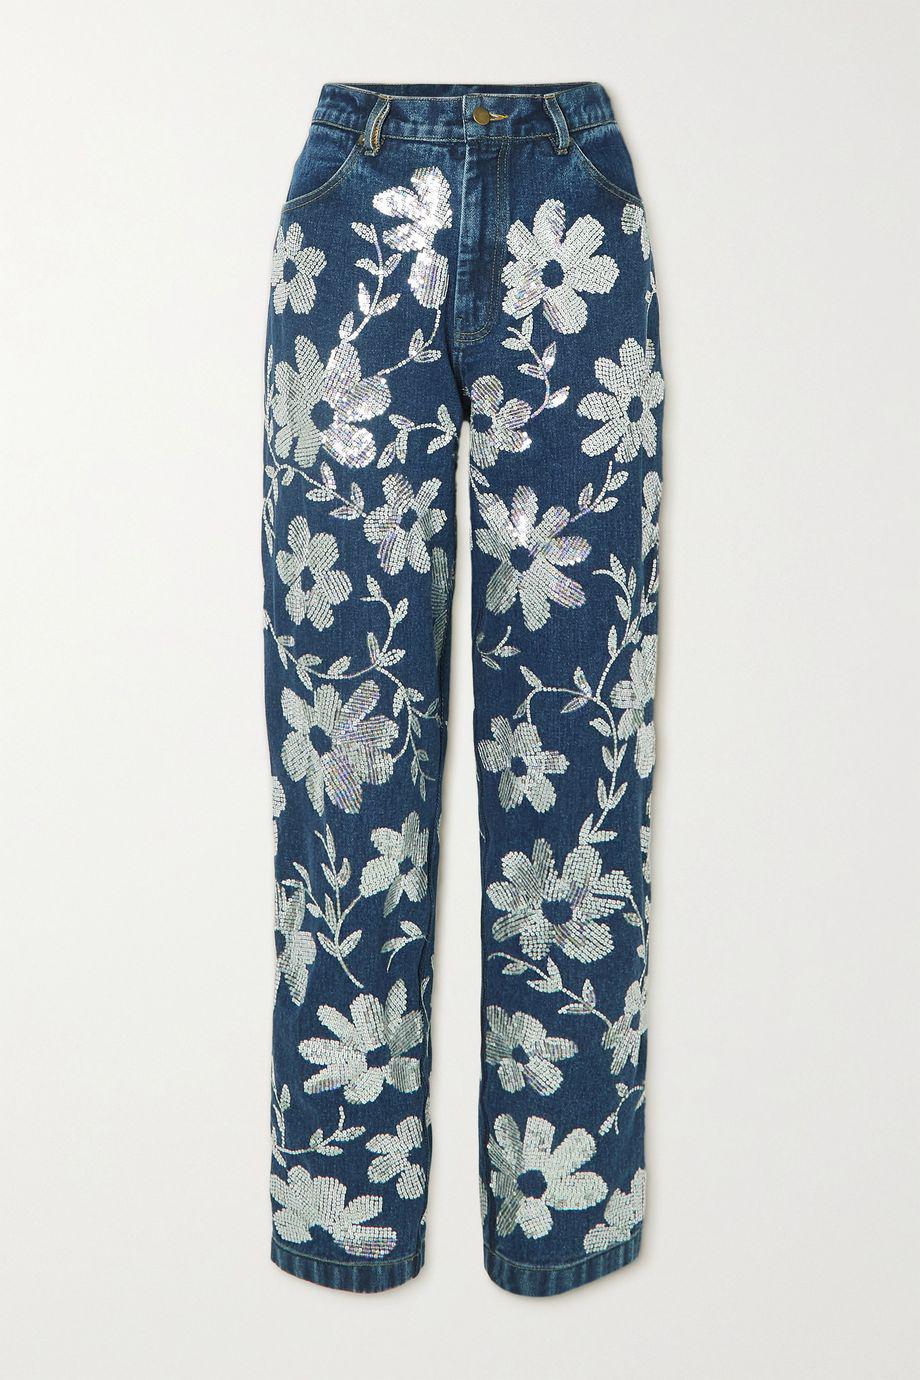 Sequin-embellished high-rise straight-leg jeans by ASHISH